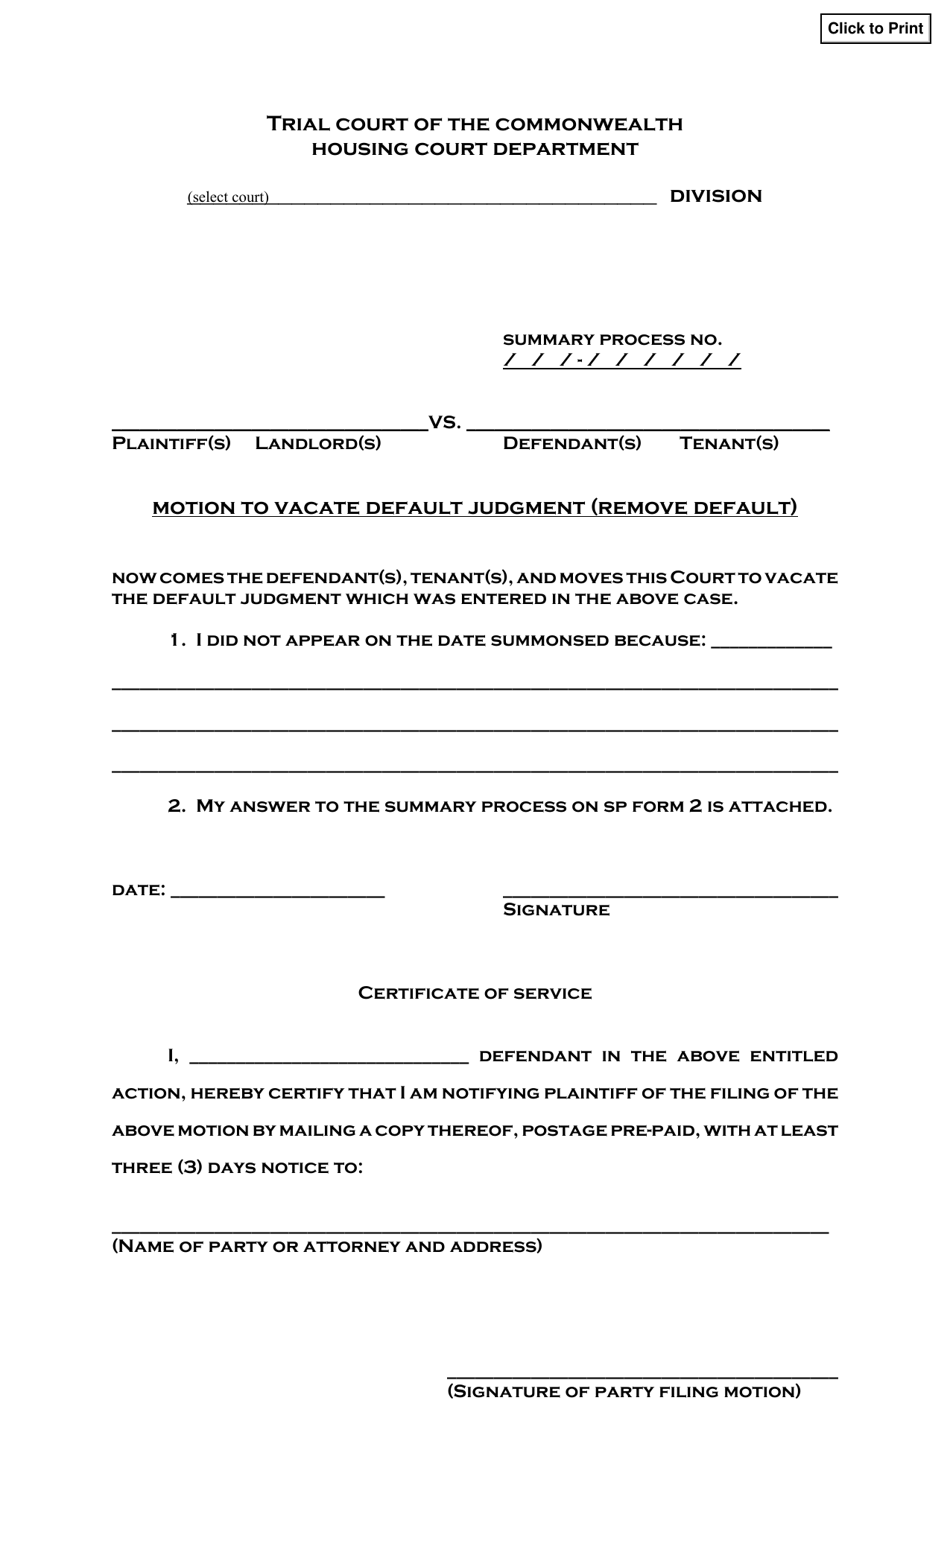 Motion to Vacate Default Judgment (Remove Default) - Massachusetts, Page 1